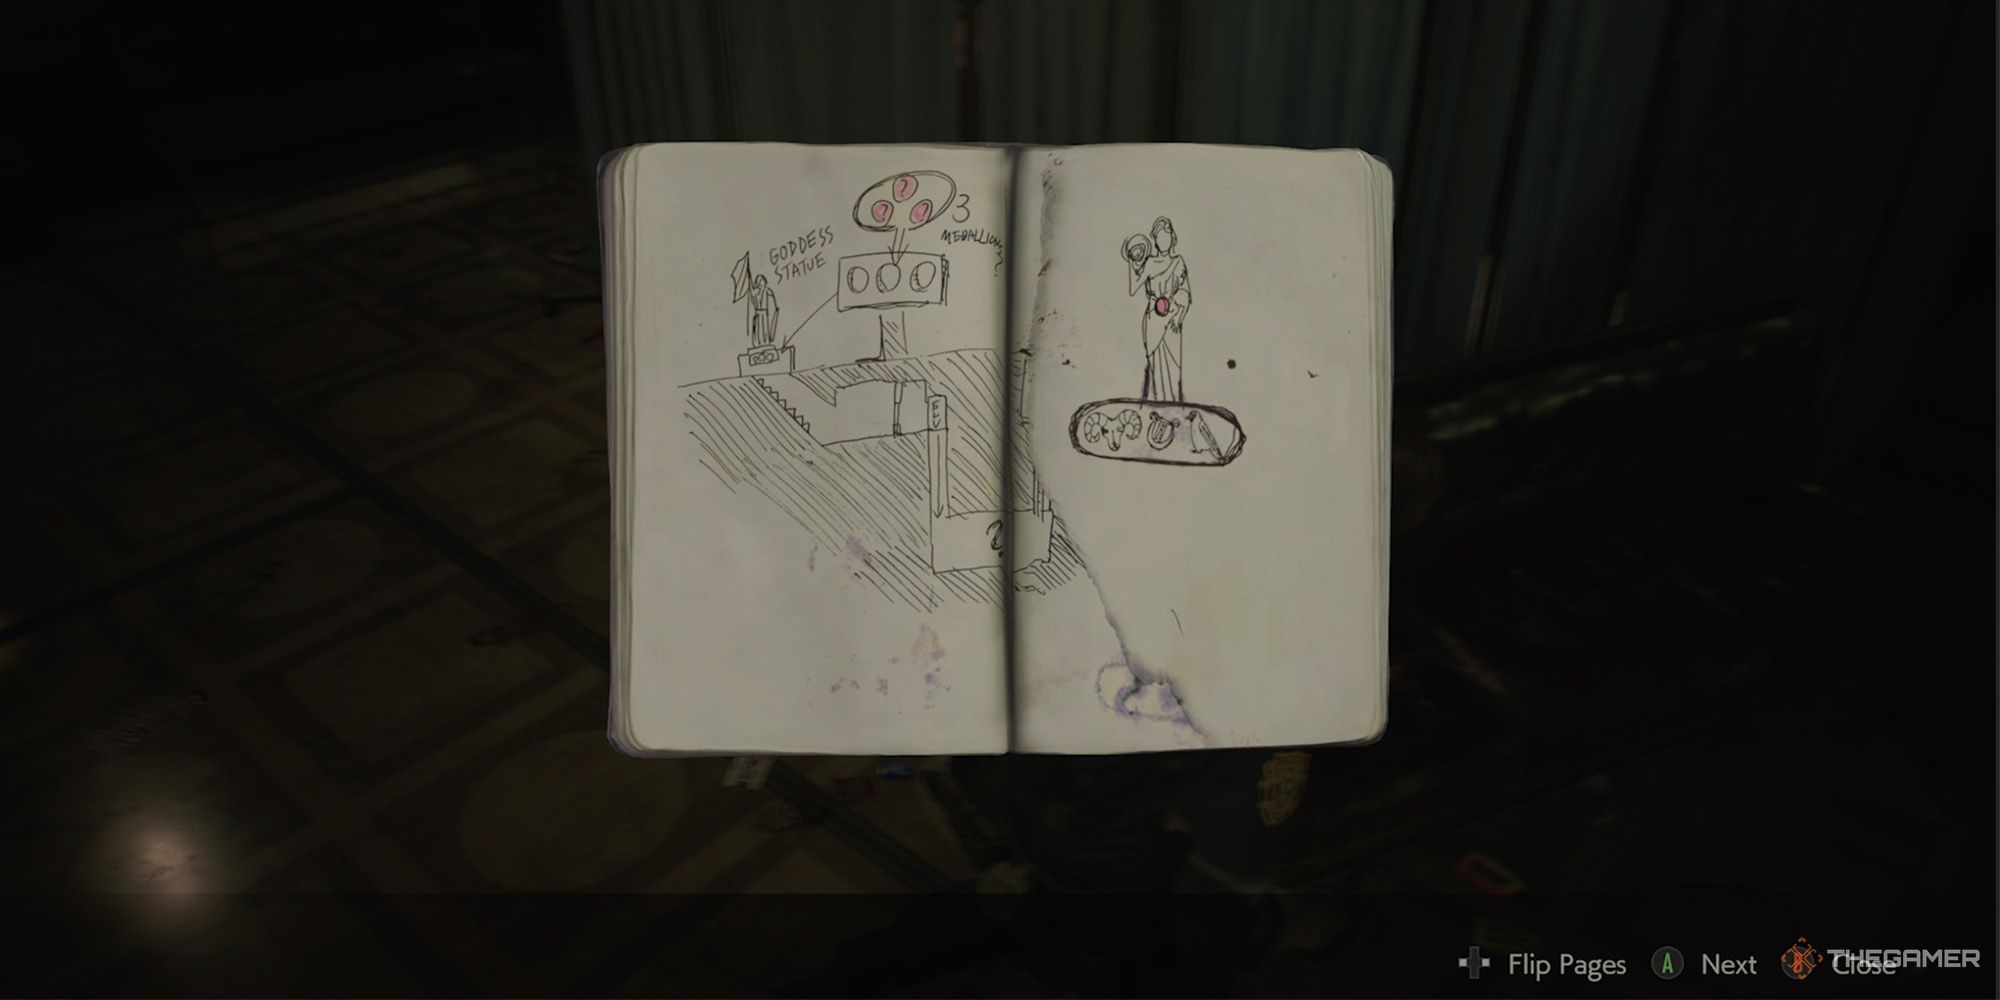 The officer's notebook from Resident Evil 2 Remake